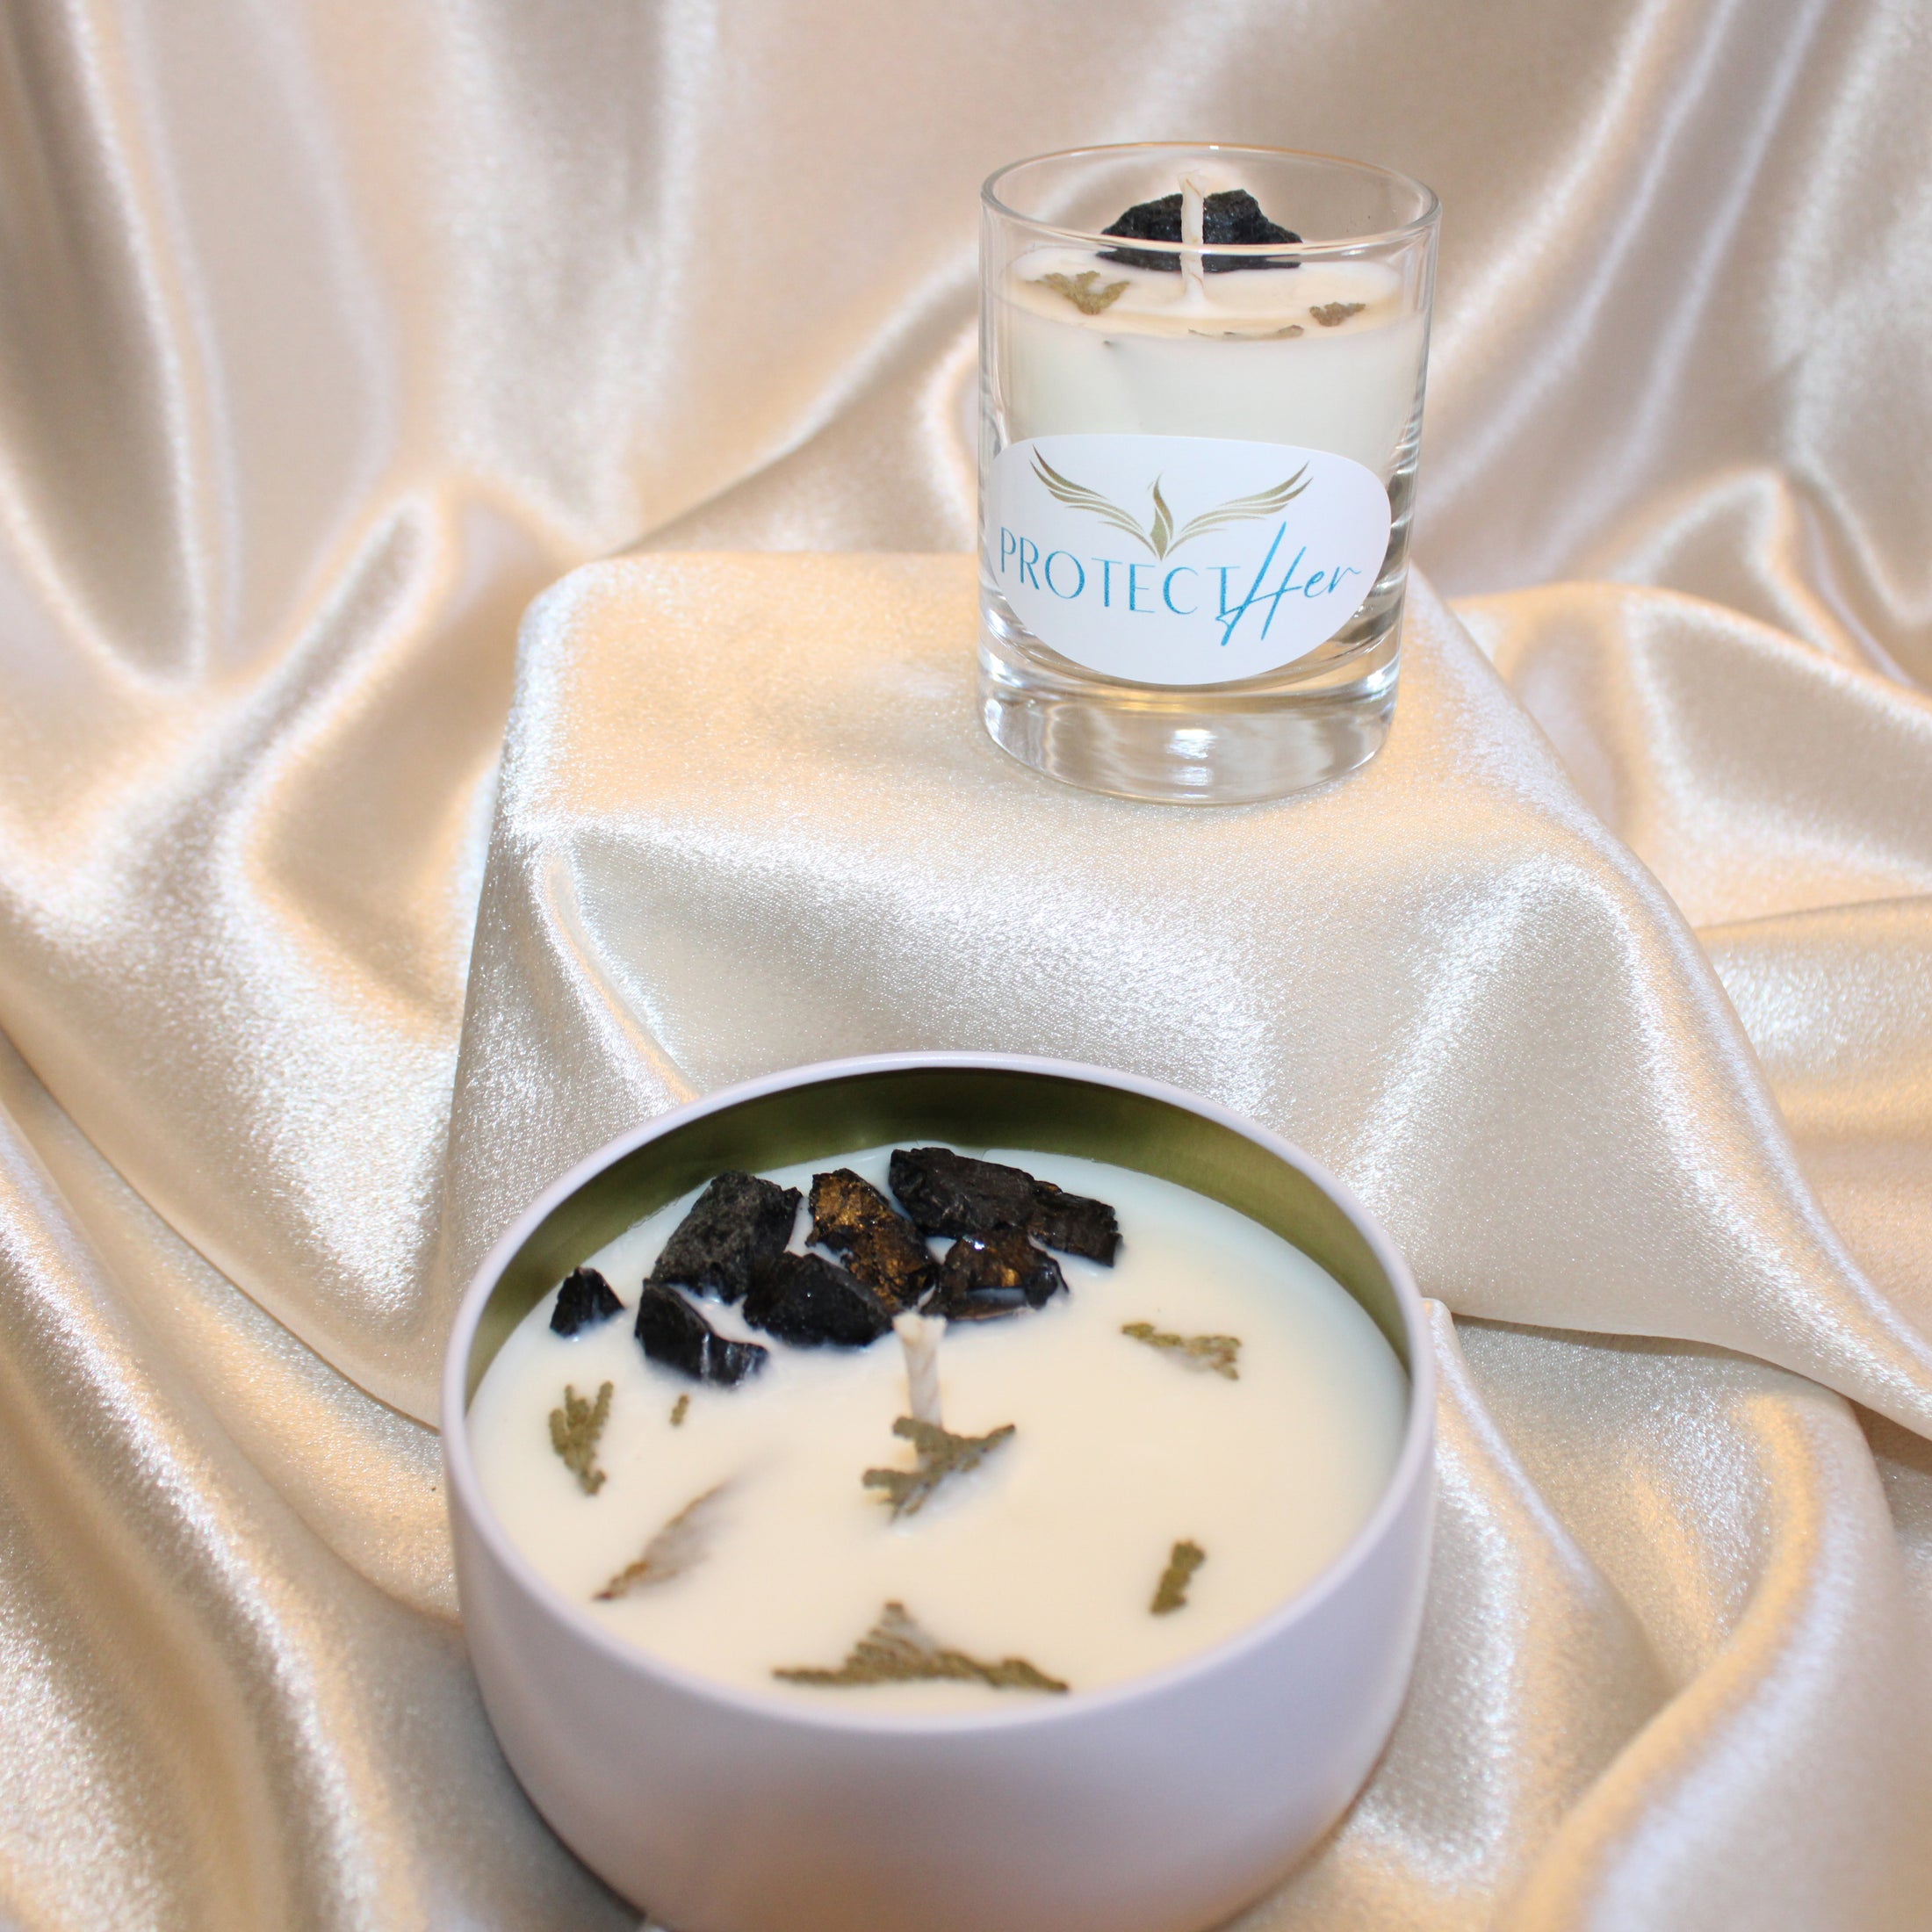 "ProtectHer" Crystal Infused Soy Candle (formerly Zen)